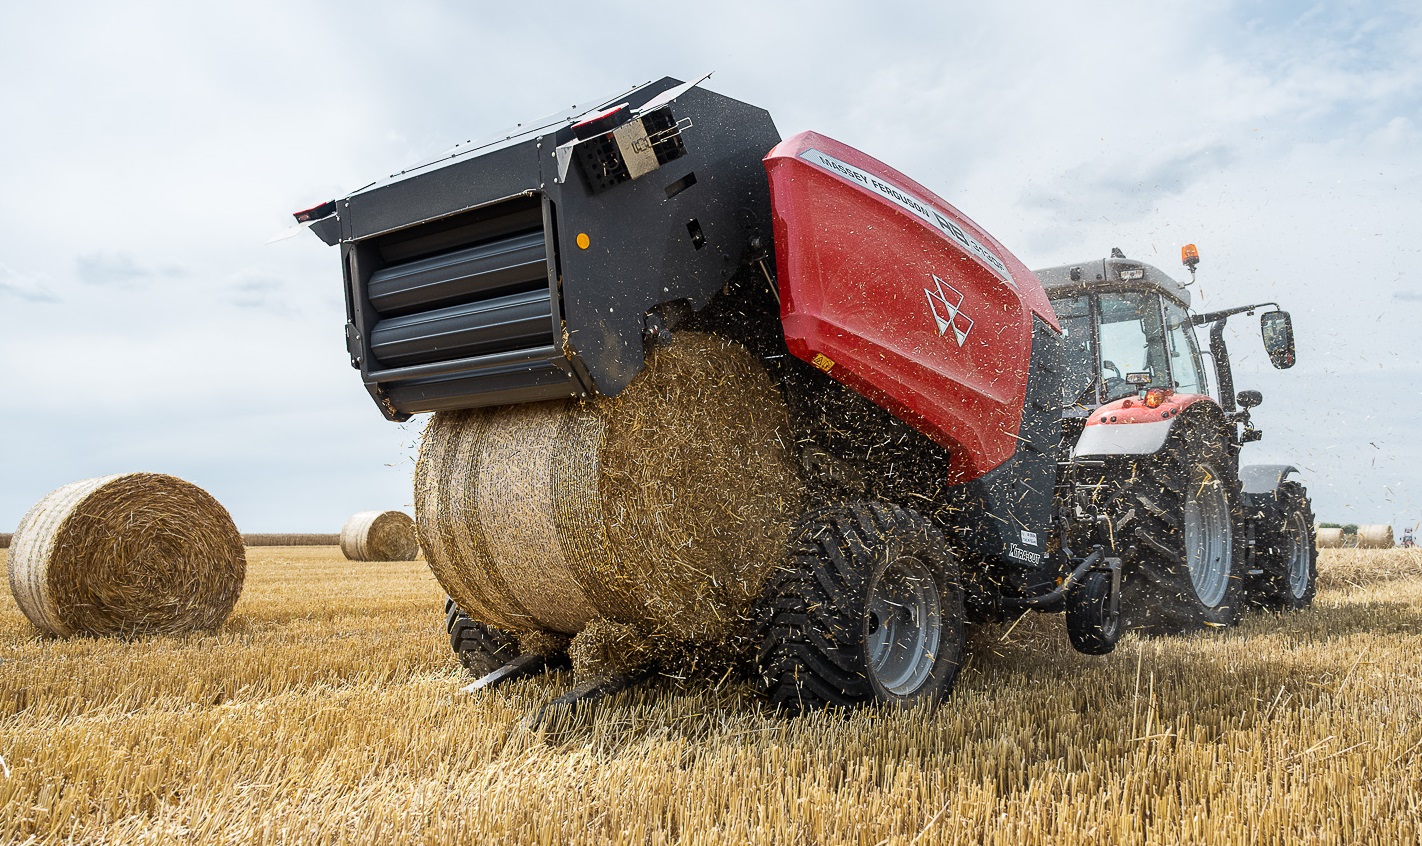 New features and options for Massey balers